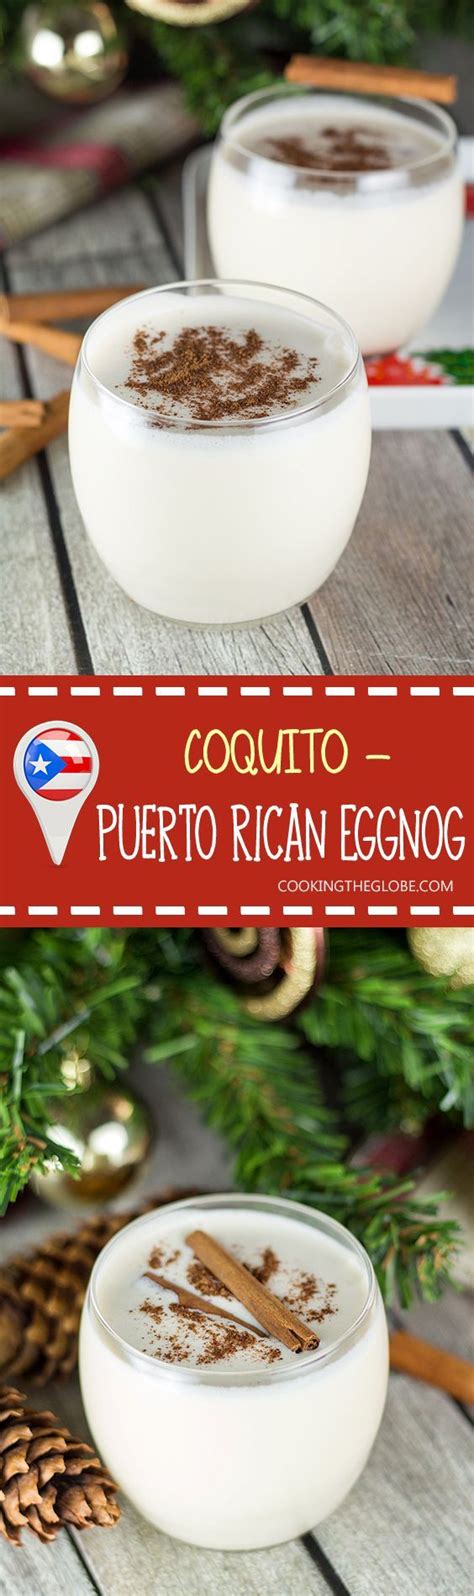 These cookies are a traditional puerto rican cookie that tastes amazing. 140 best Puerto Rican Food images on Pinterest | Cooking ...